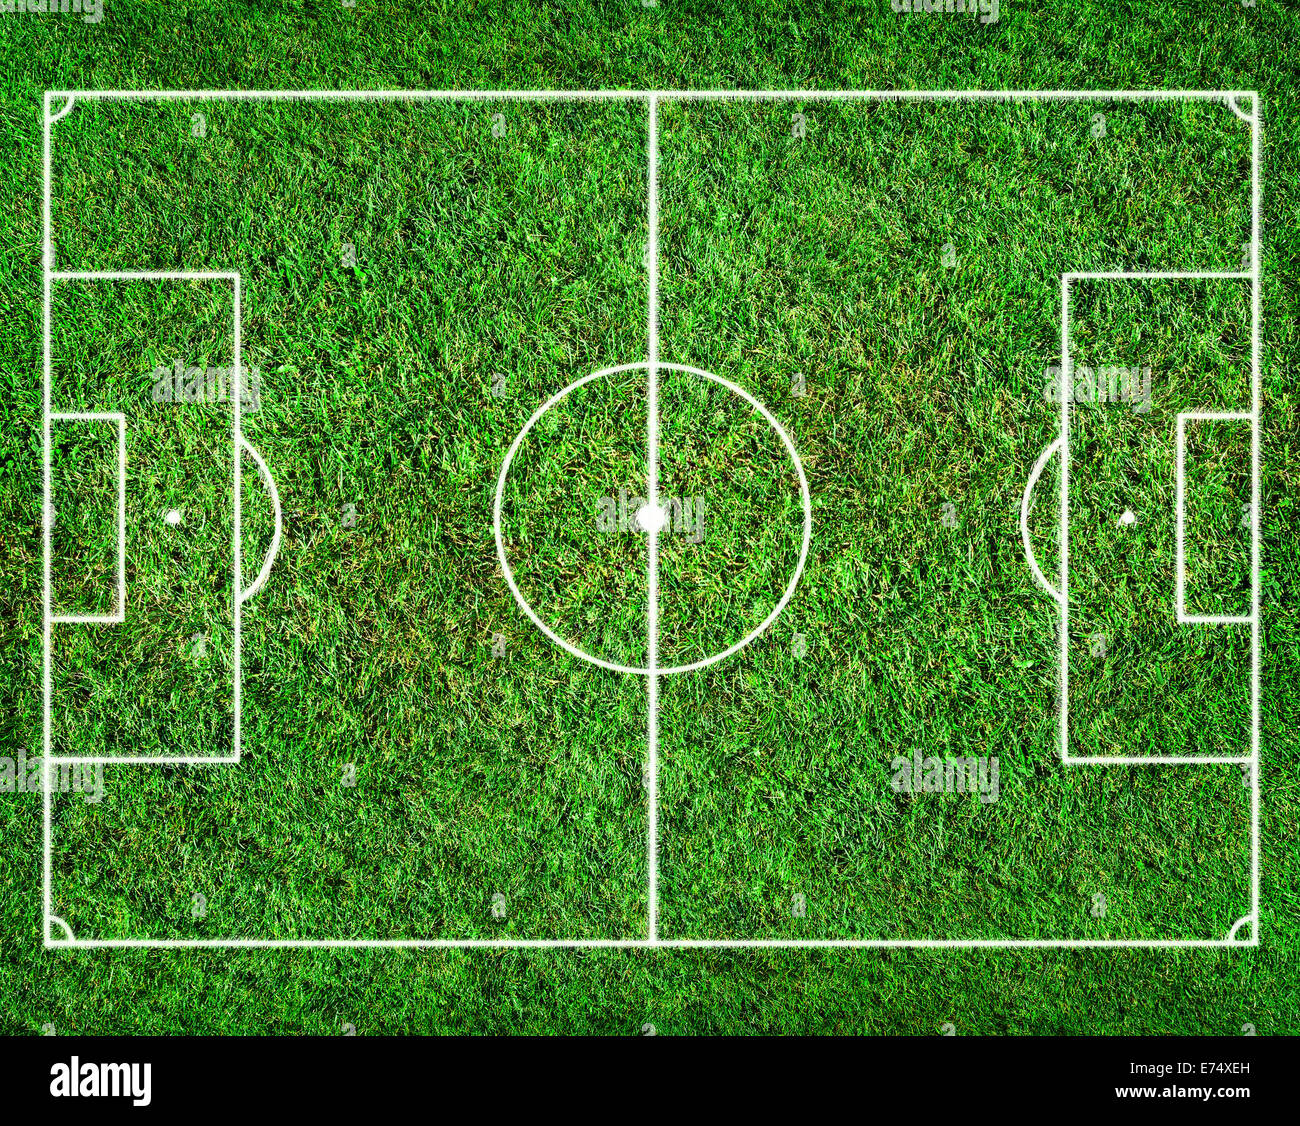 soccer field with white lines. top view Stock Photo